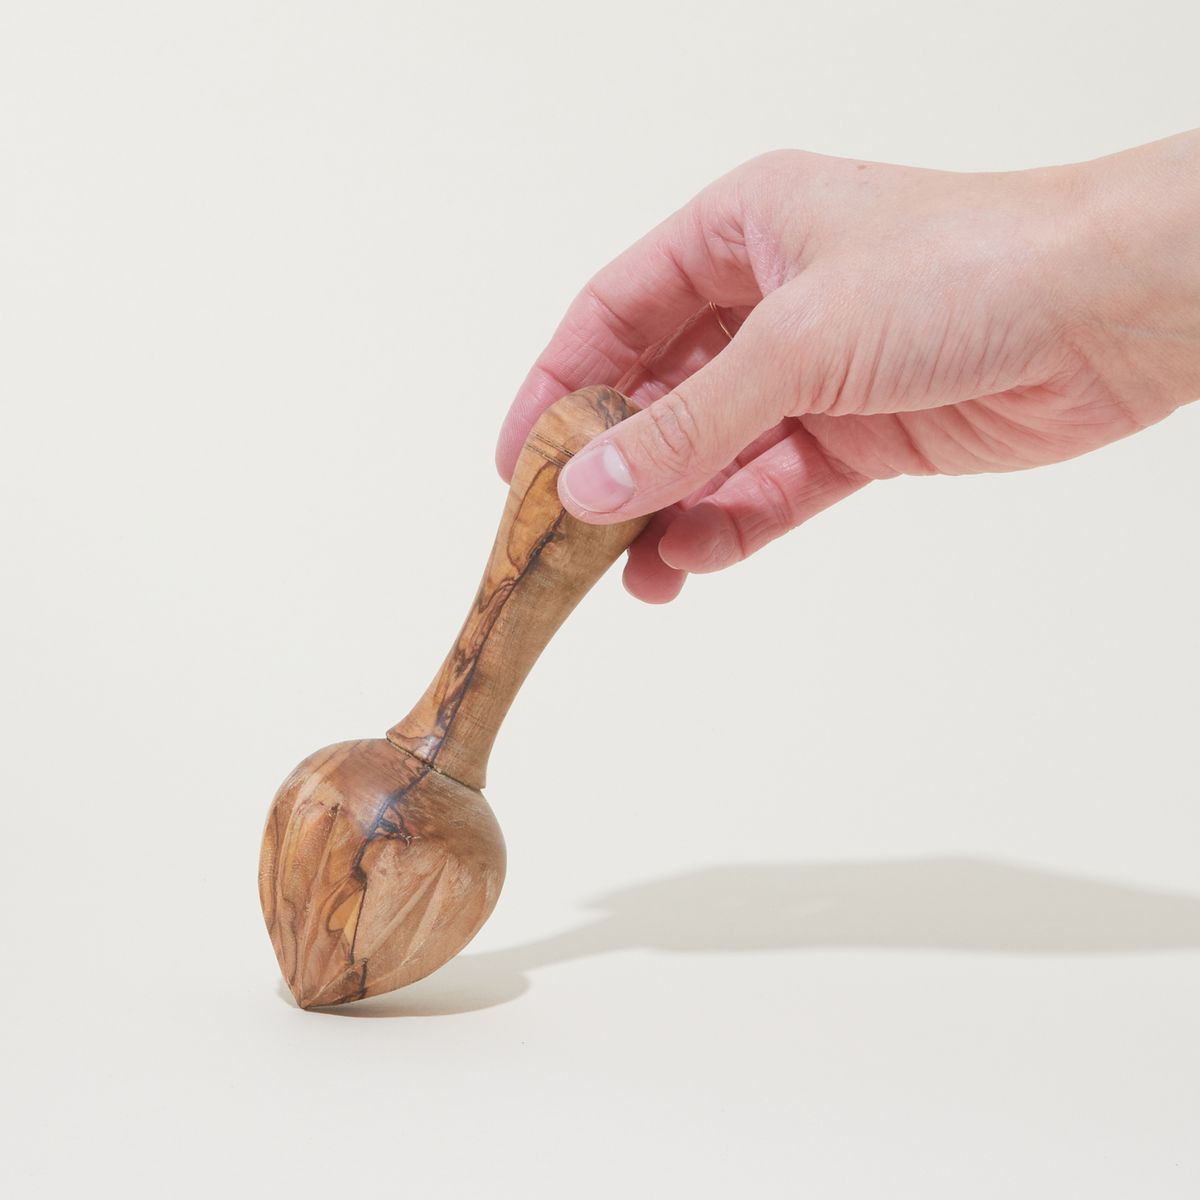 Hand holding a olivewood citrus reamer